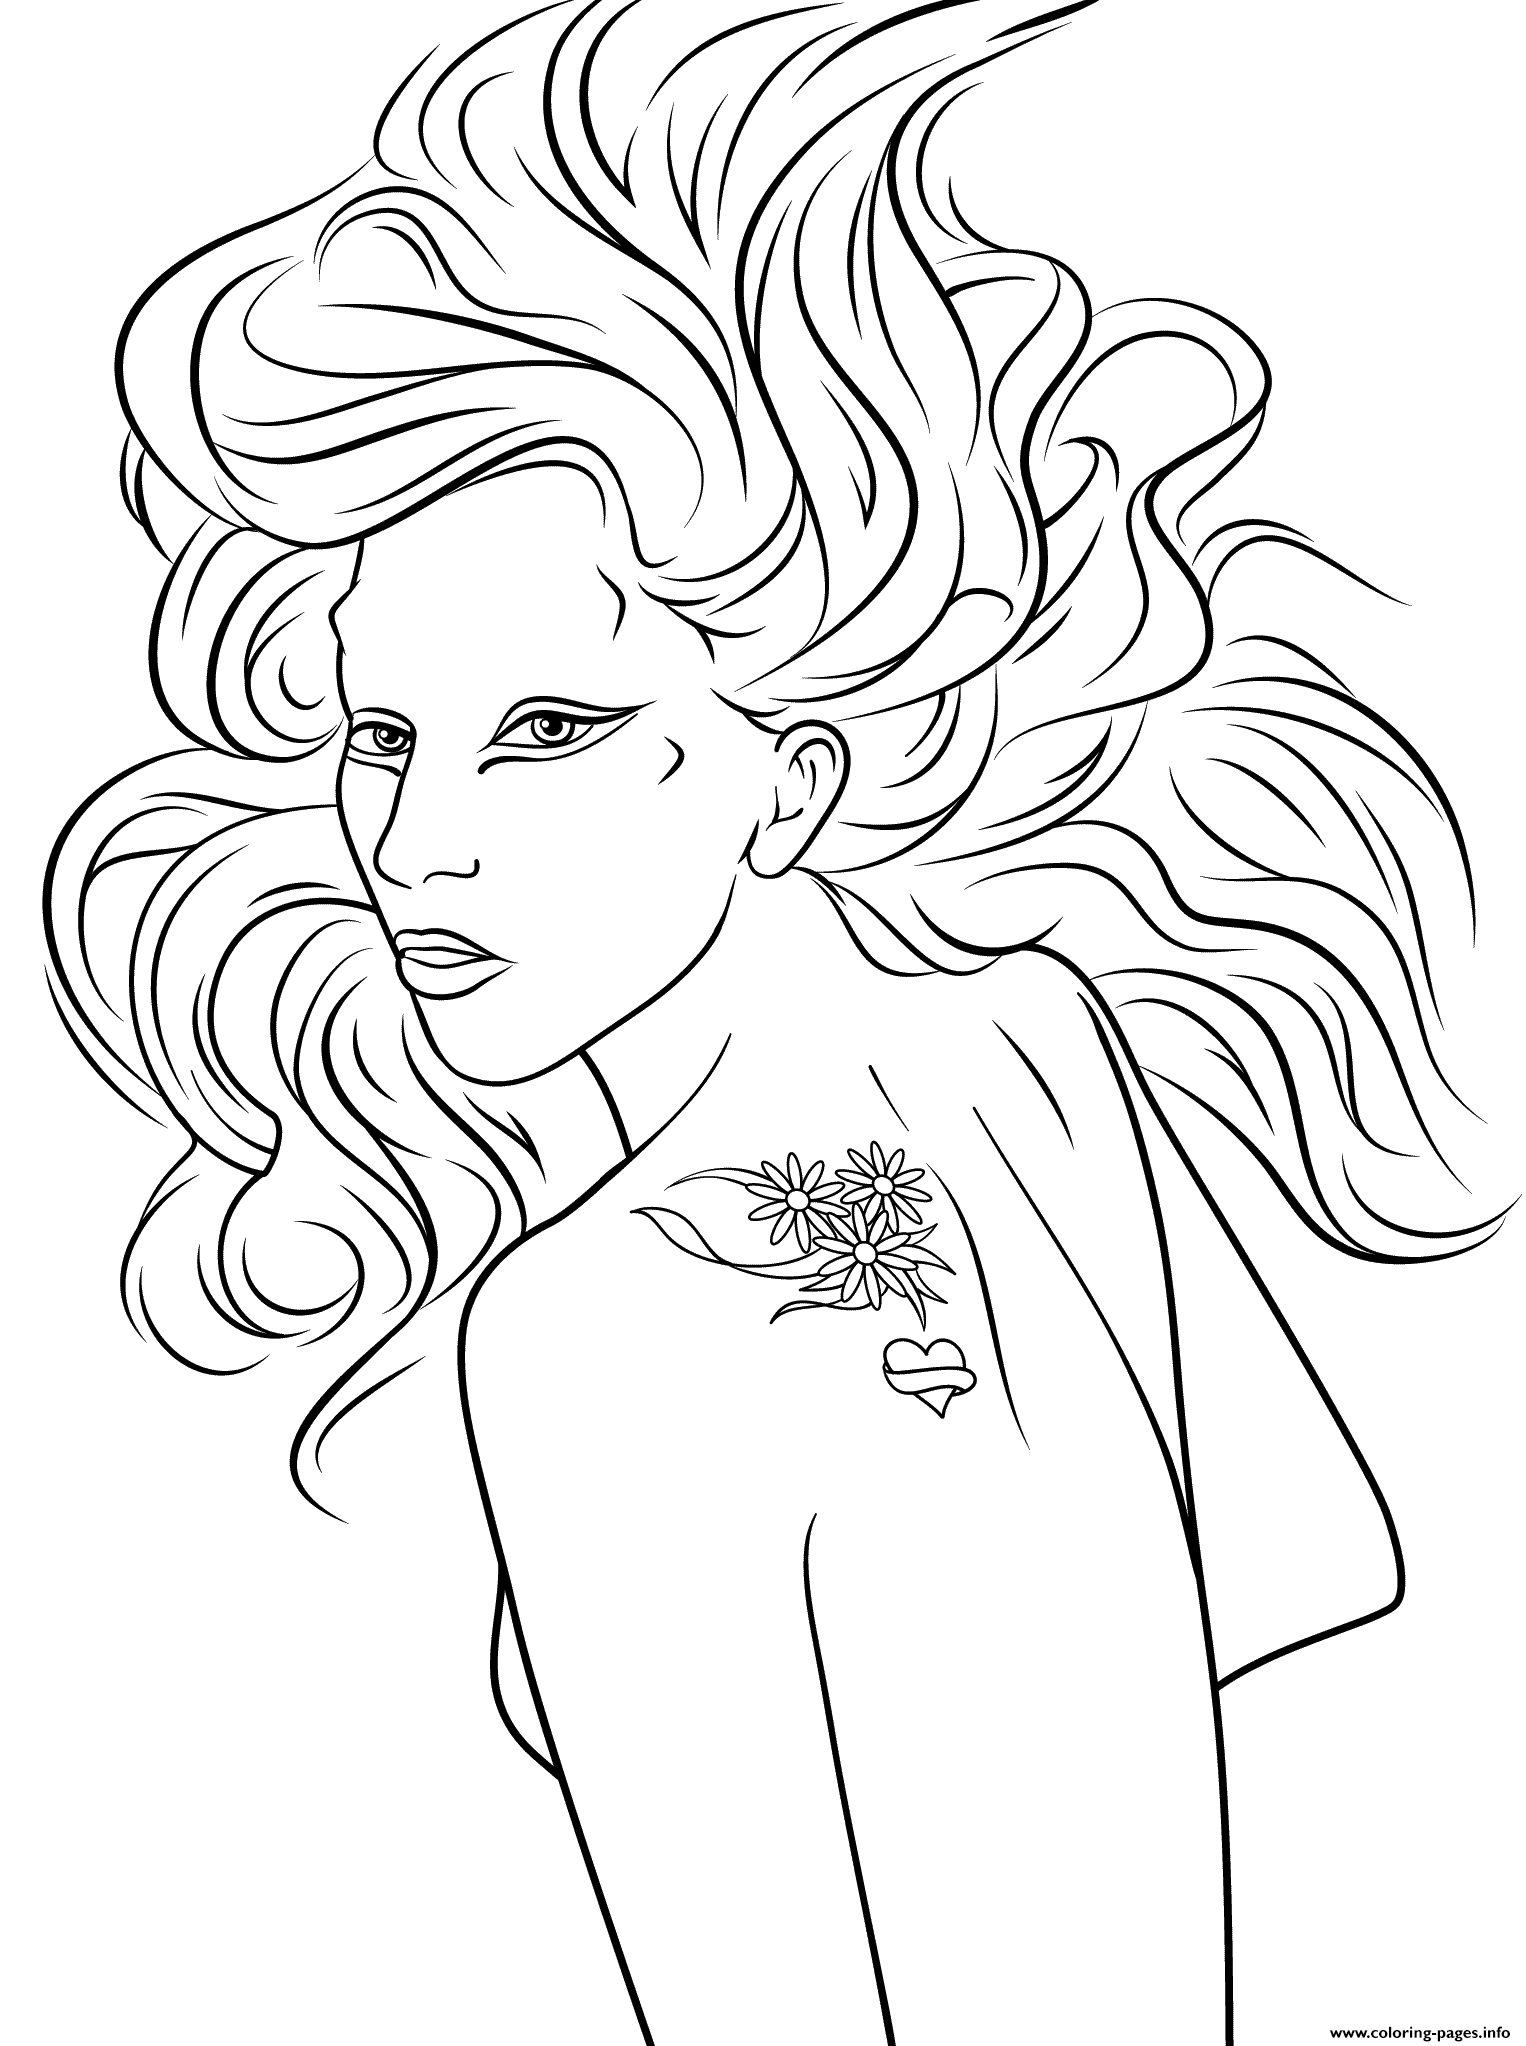 Lady Gaga Celebrity Coloring Pages Printable Online